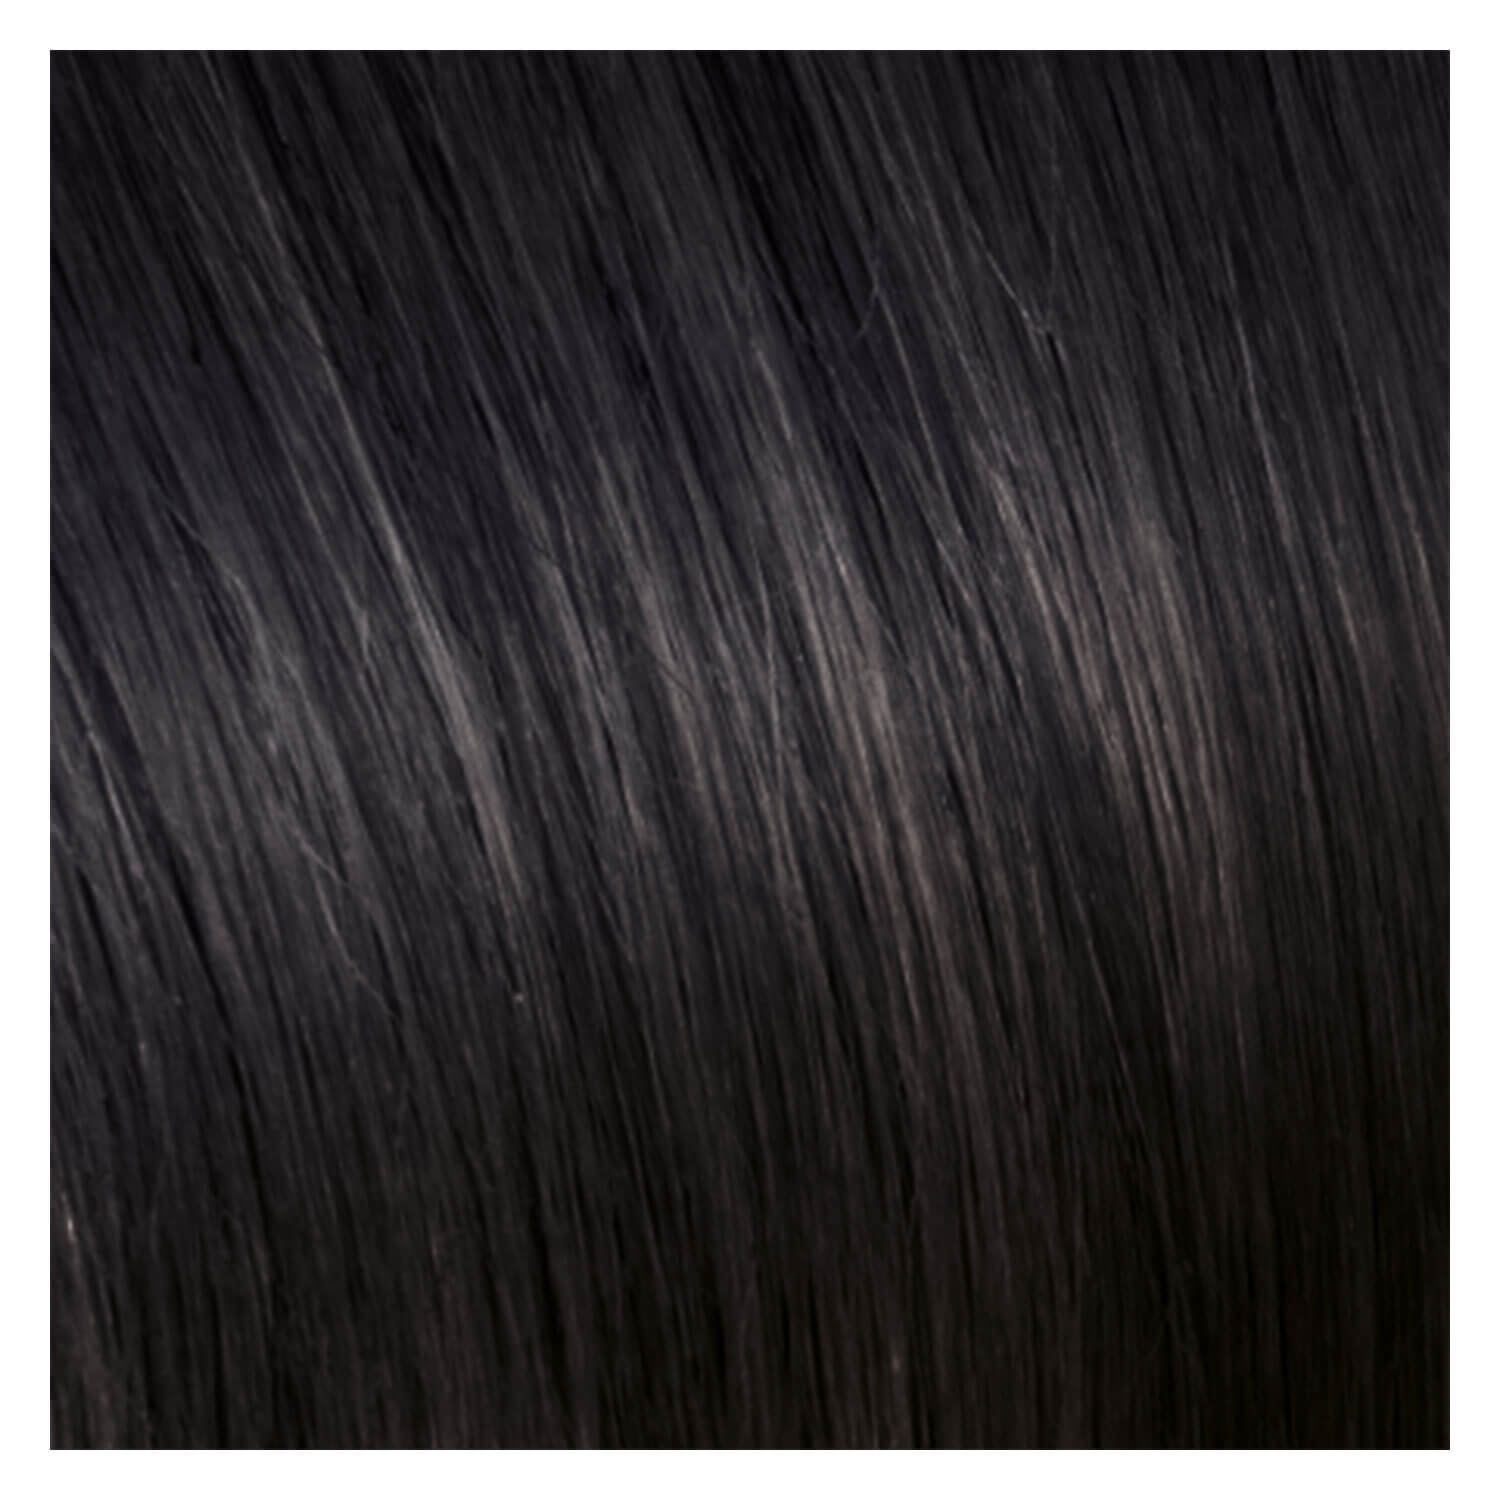 Product image from SHE Bonding-System Hair Extensions Wavy - 2 Dunkles Kastanienbraun 55/60cm